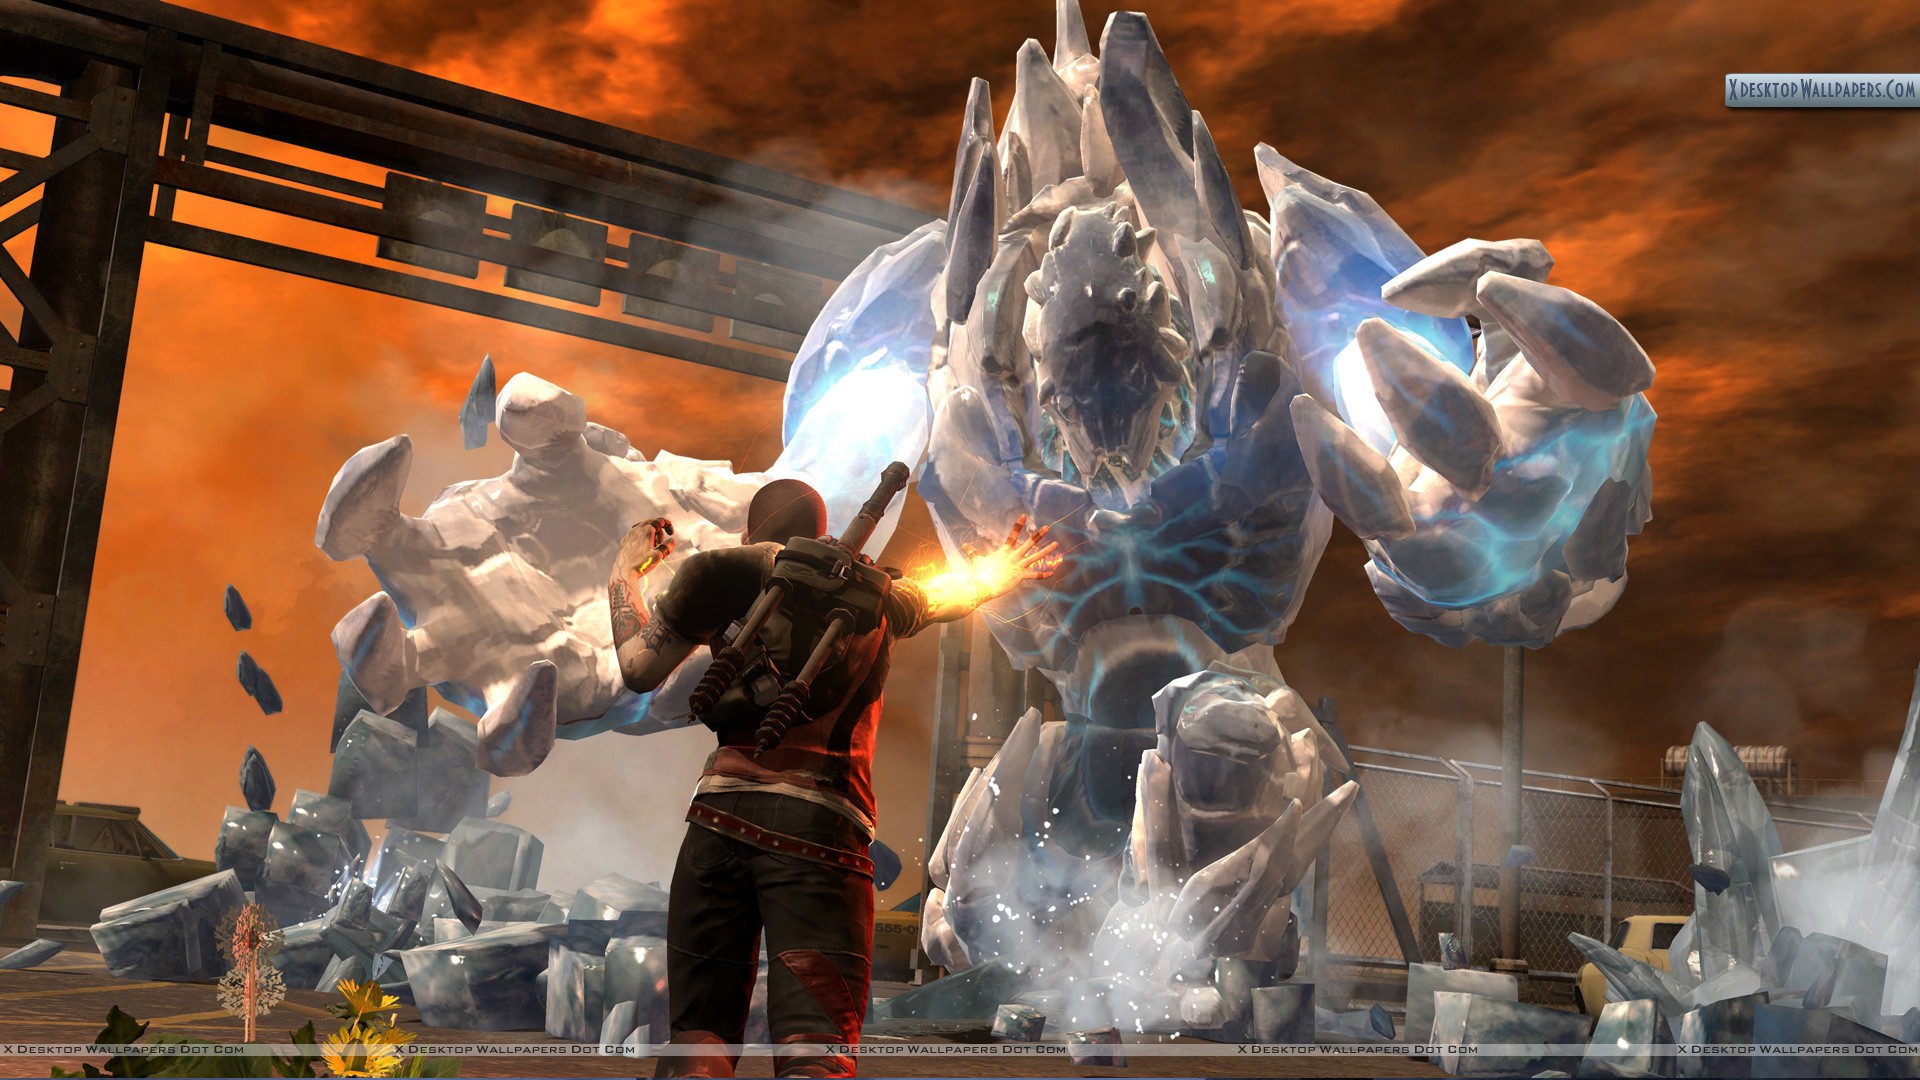 inFAMOUS 2 Wallpapers, Photos & Images in HD